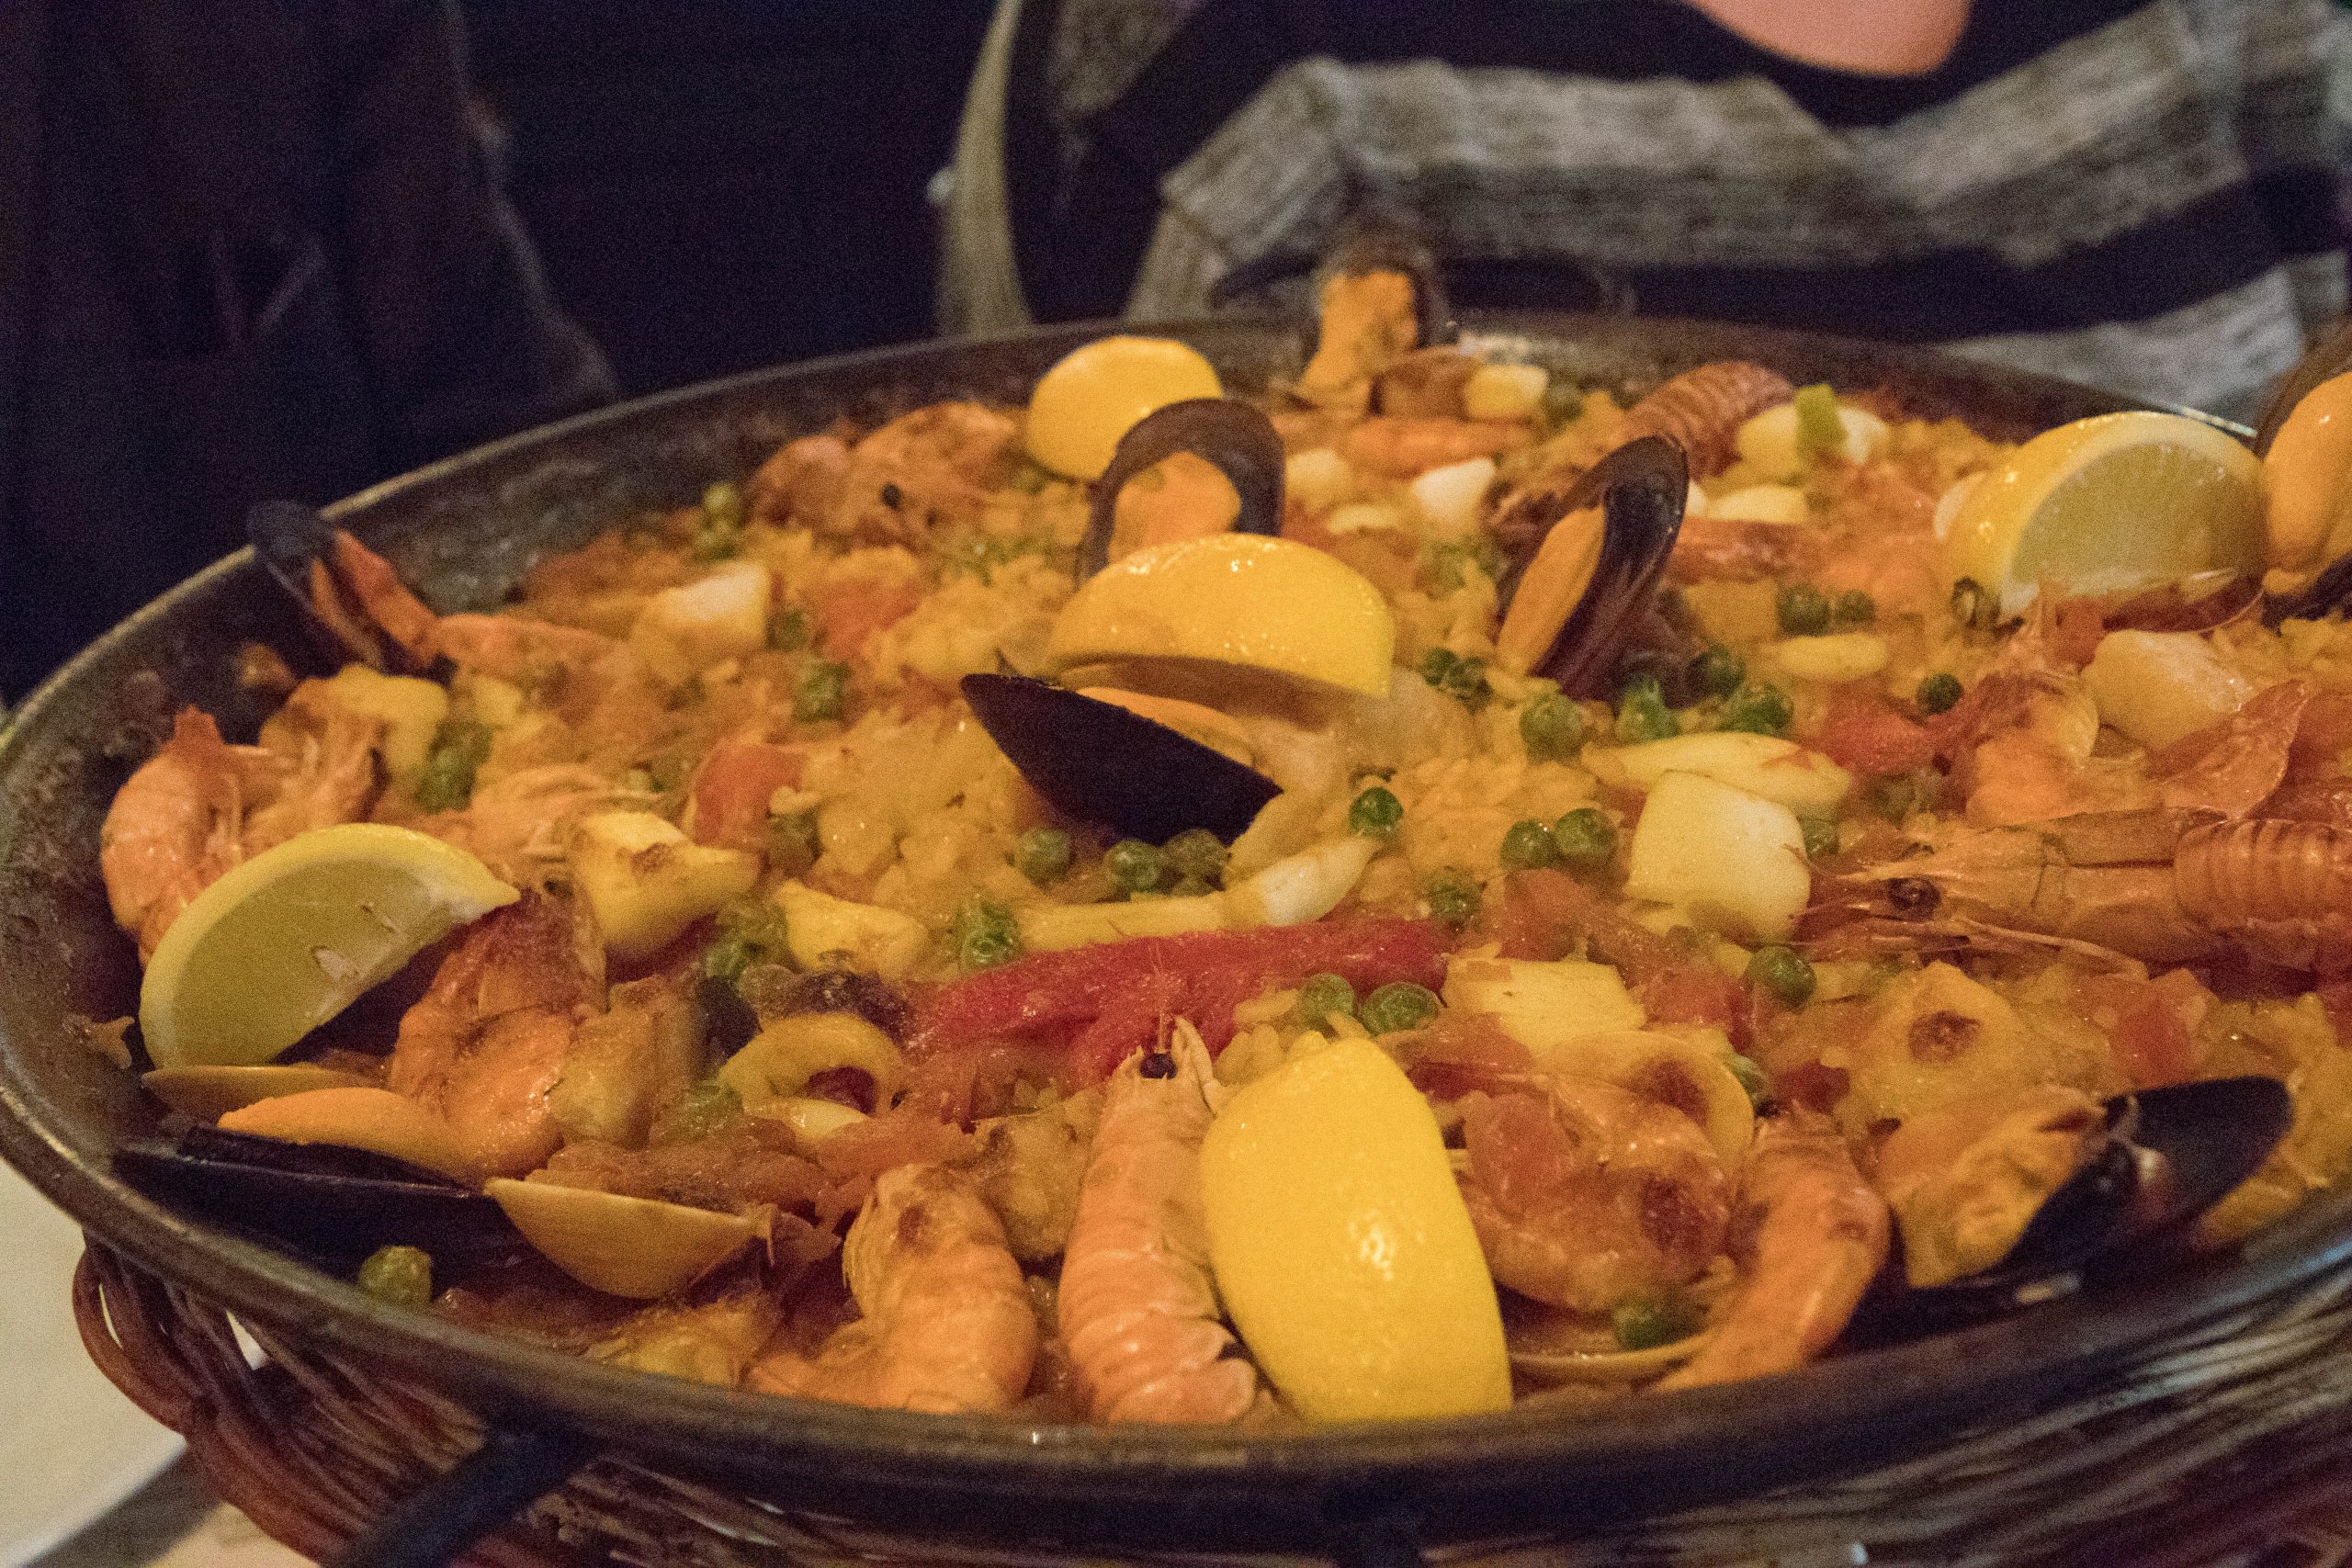 Once could say I like paella so much I throw a trip to Spain just to have it.